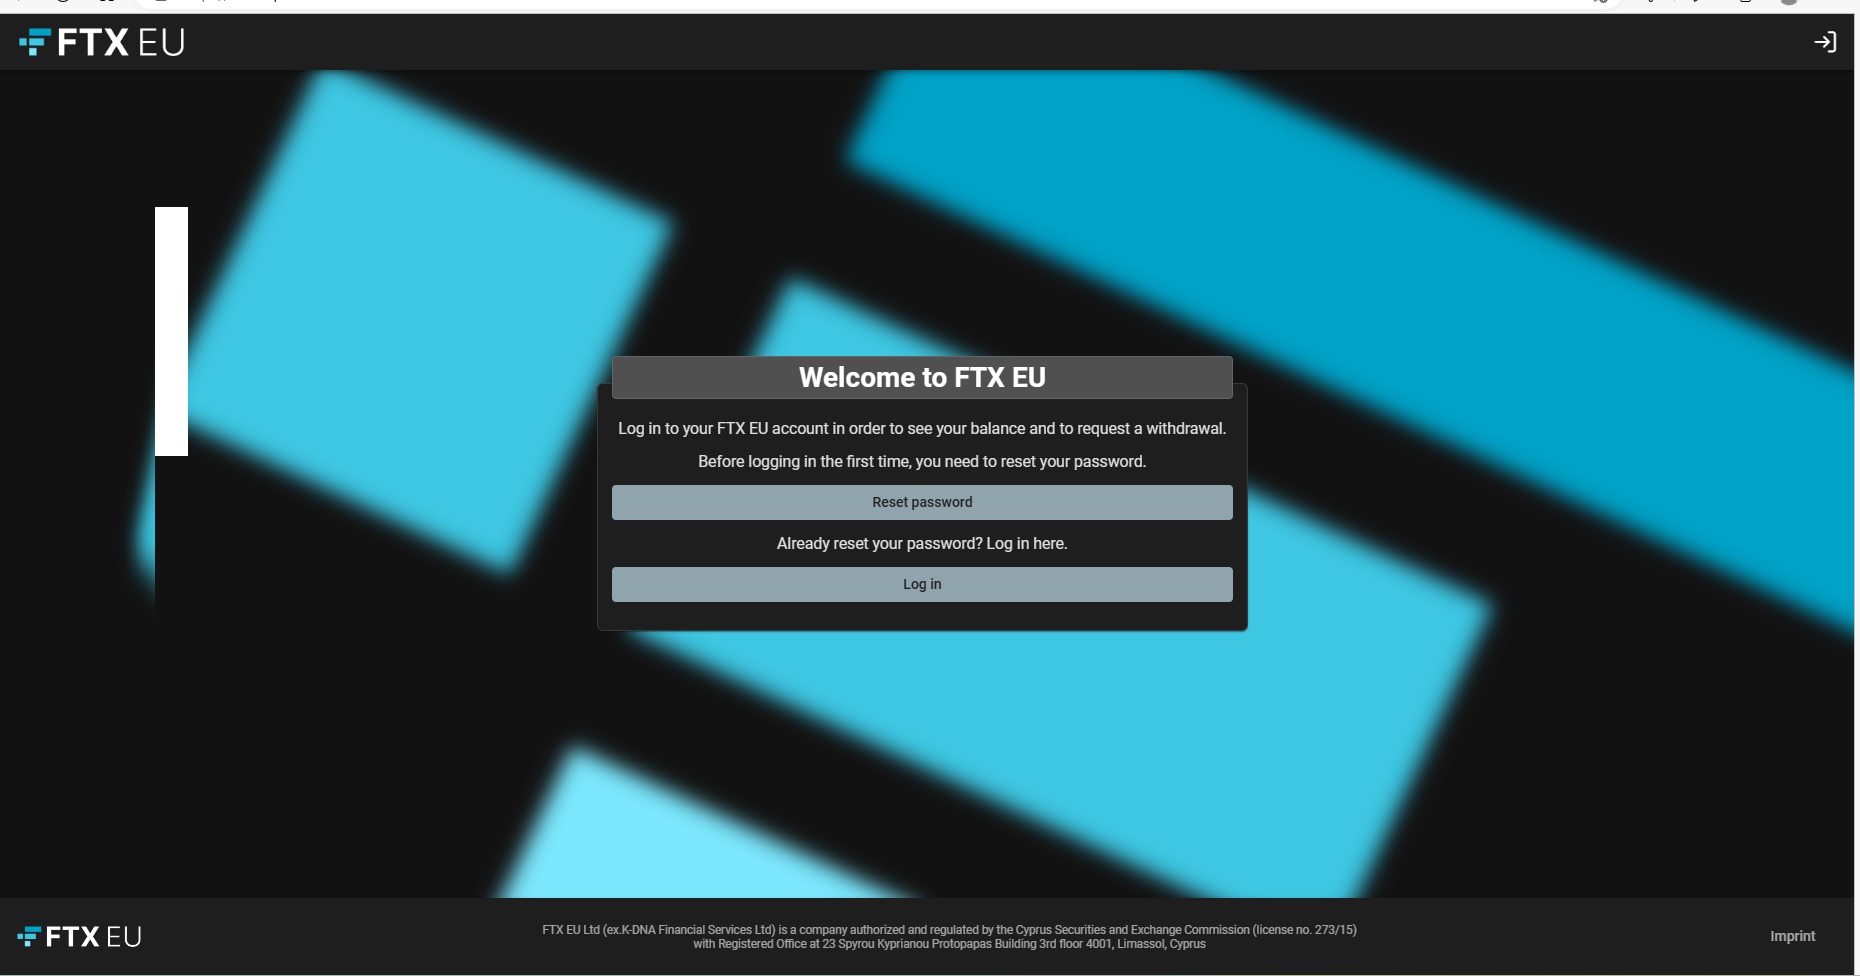 CySEC Approves New Website for FTX EU Customer Withdrawal